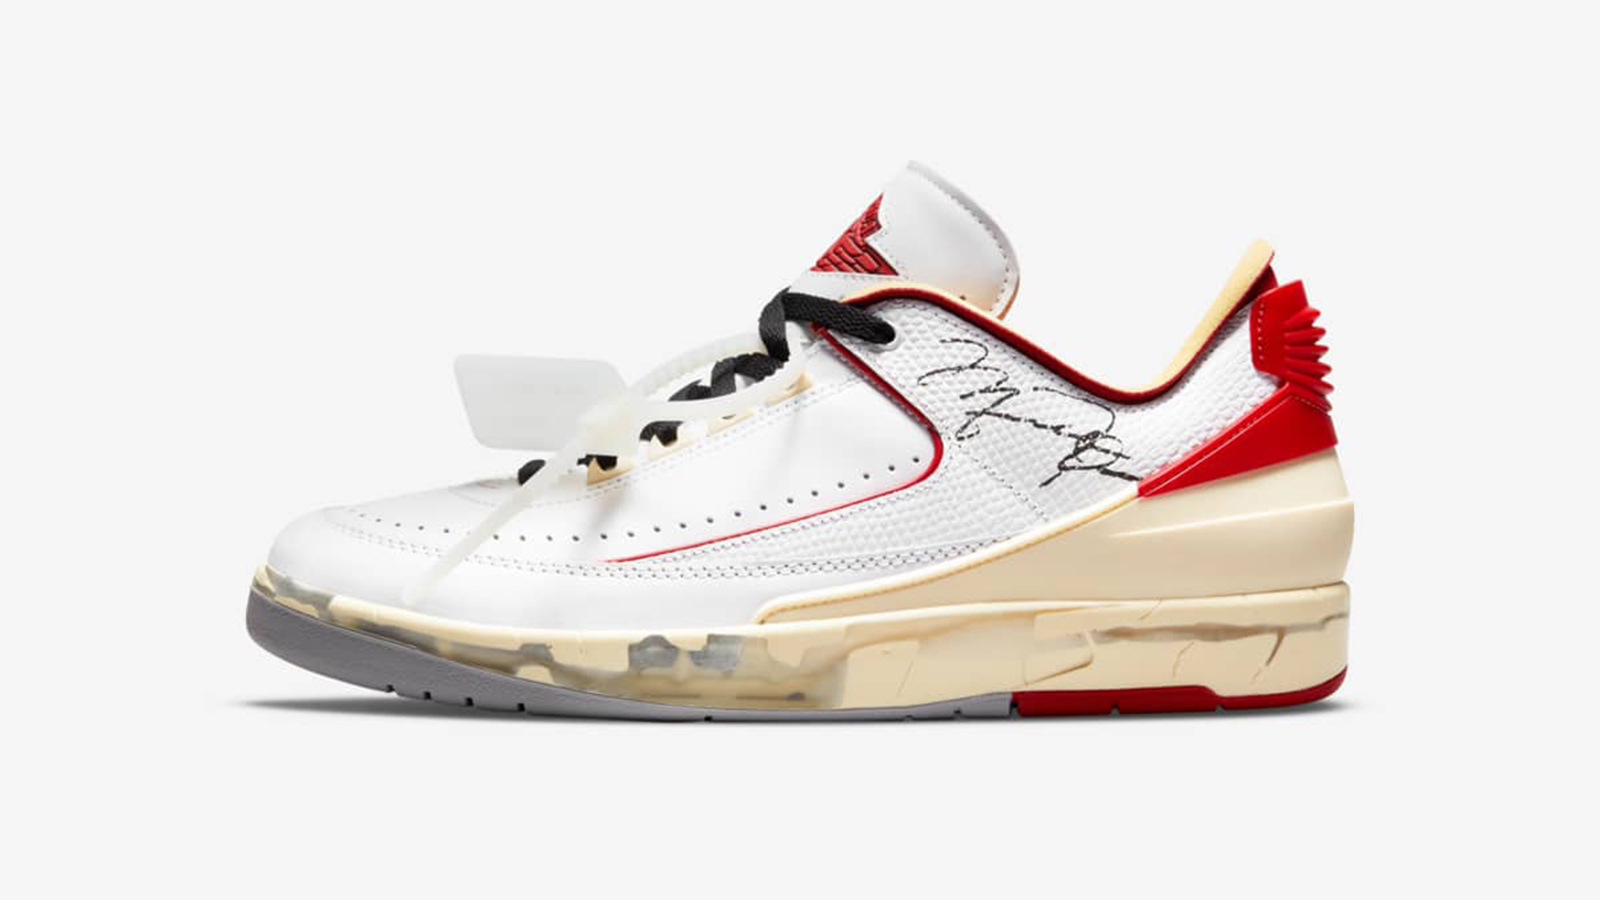 Air Jordan 2 Low x Off-White White and Varsity Red